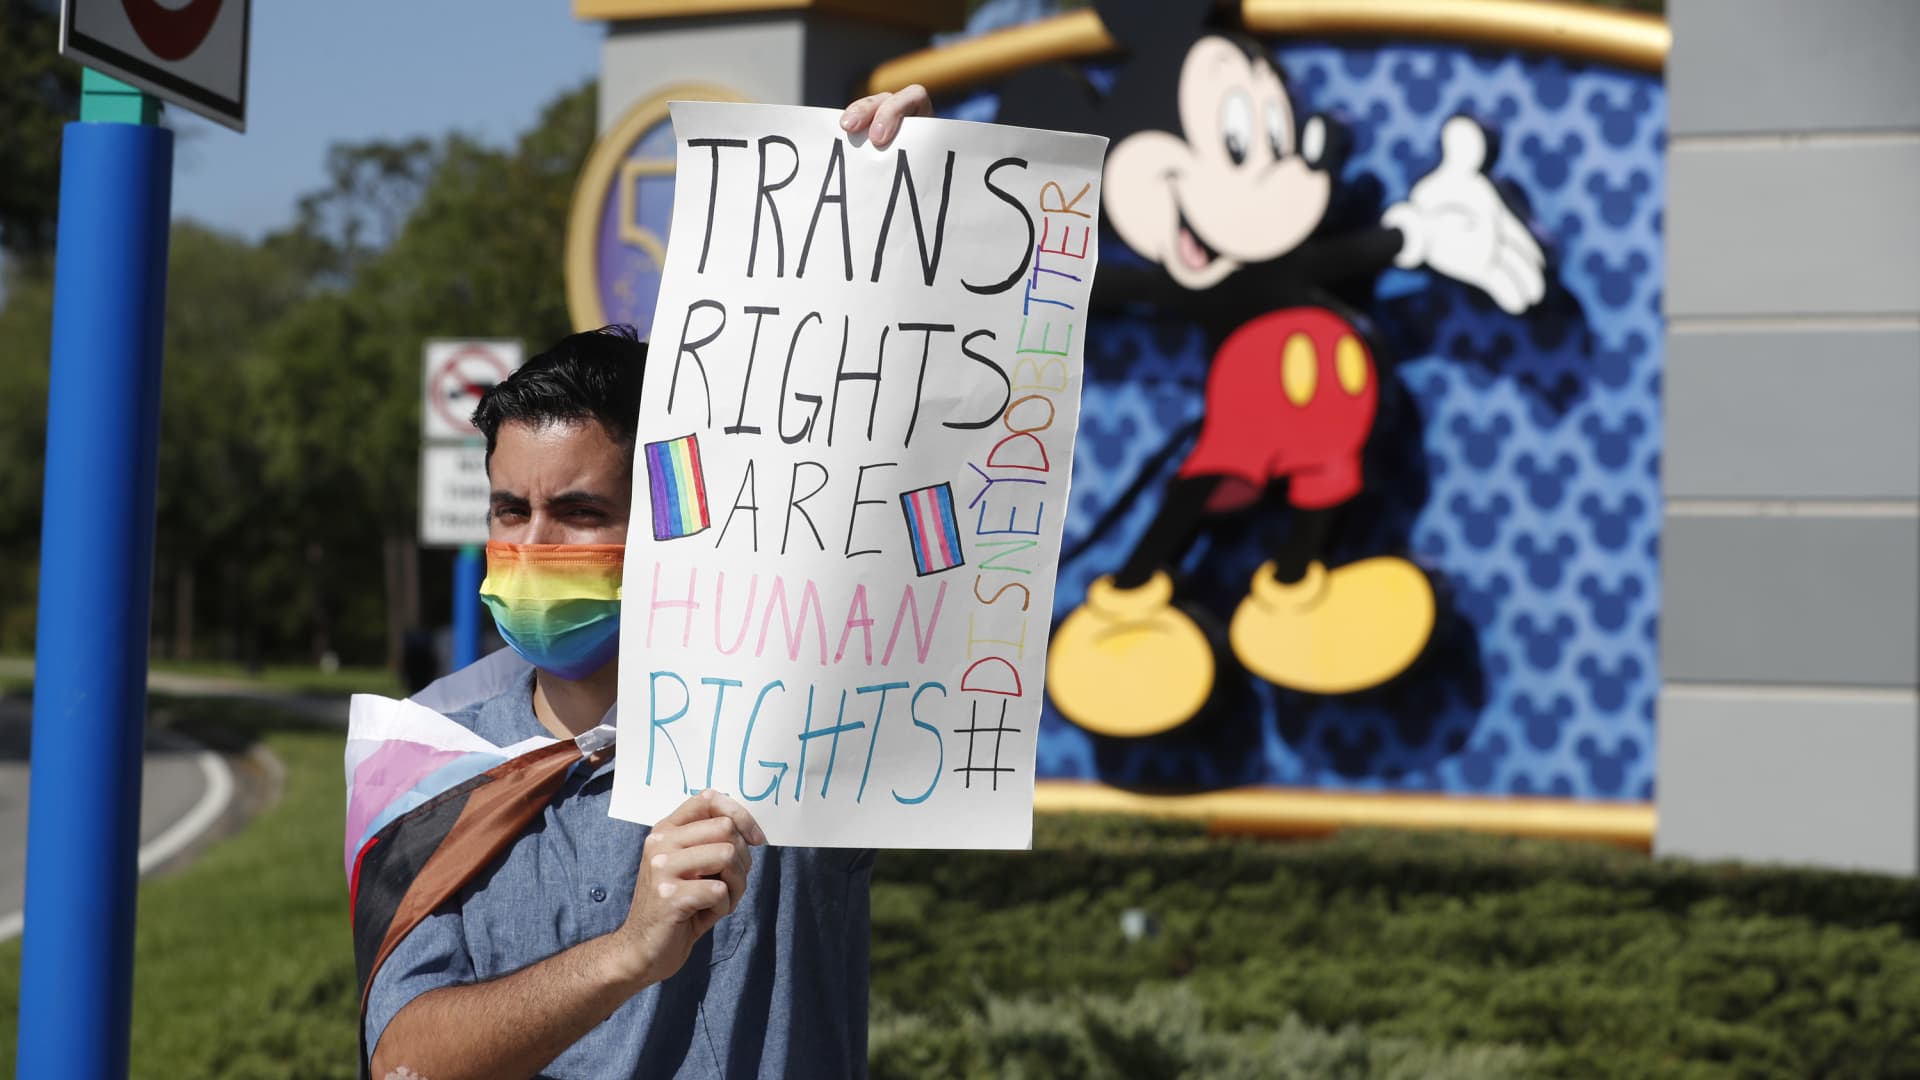 Disney employee Nicholas Maldonado holds a sign while protesting outside of Walt Disney World on March 22, 2022 in Orlando, Florida. Employees are staging a company-wide walkout today to protest Walt Disney Co.'s response to controversial legislation passed in Florida known as the “Don’t Say Gay” bill.